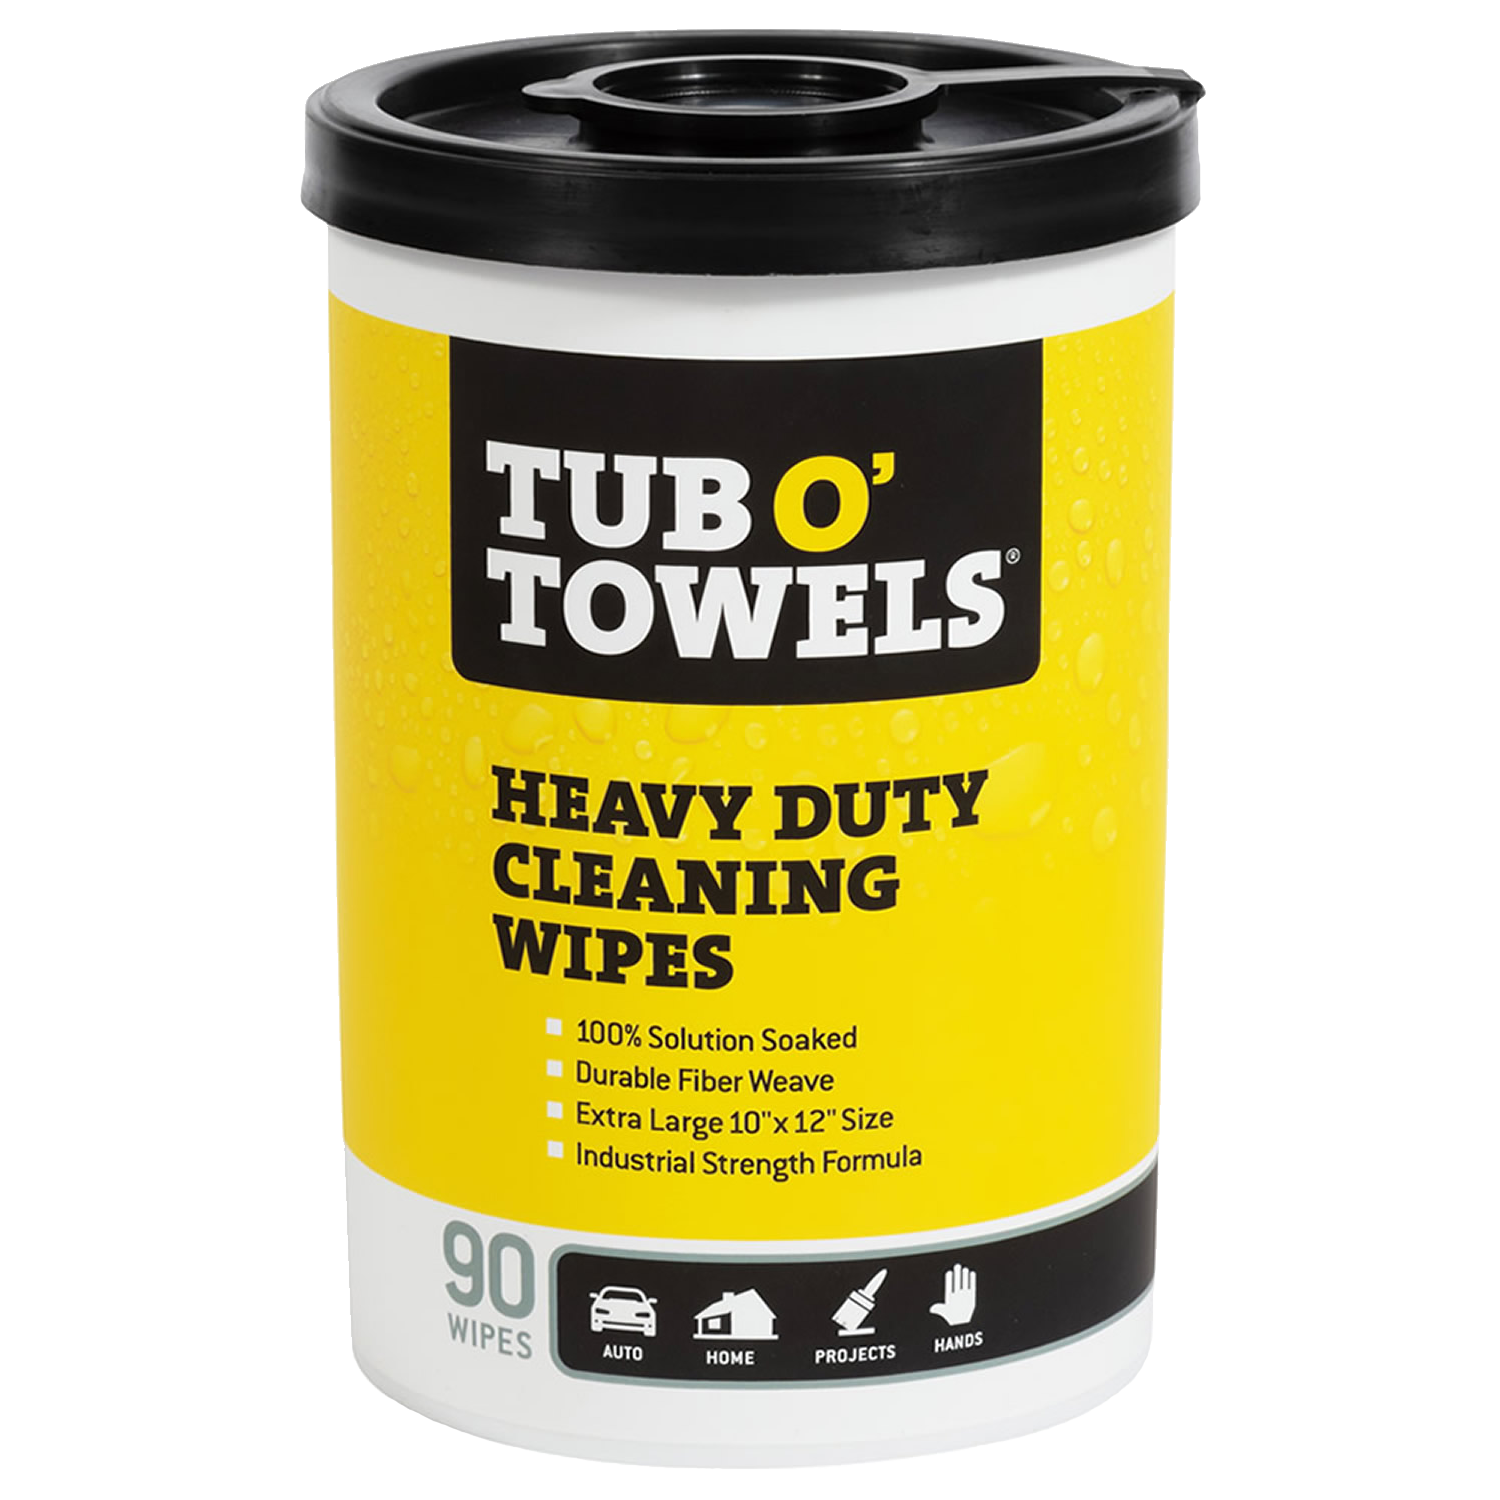 Tub O' Towels Heavy Duty Cleaning Wipes - 90 Count